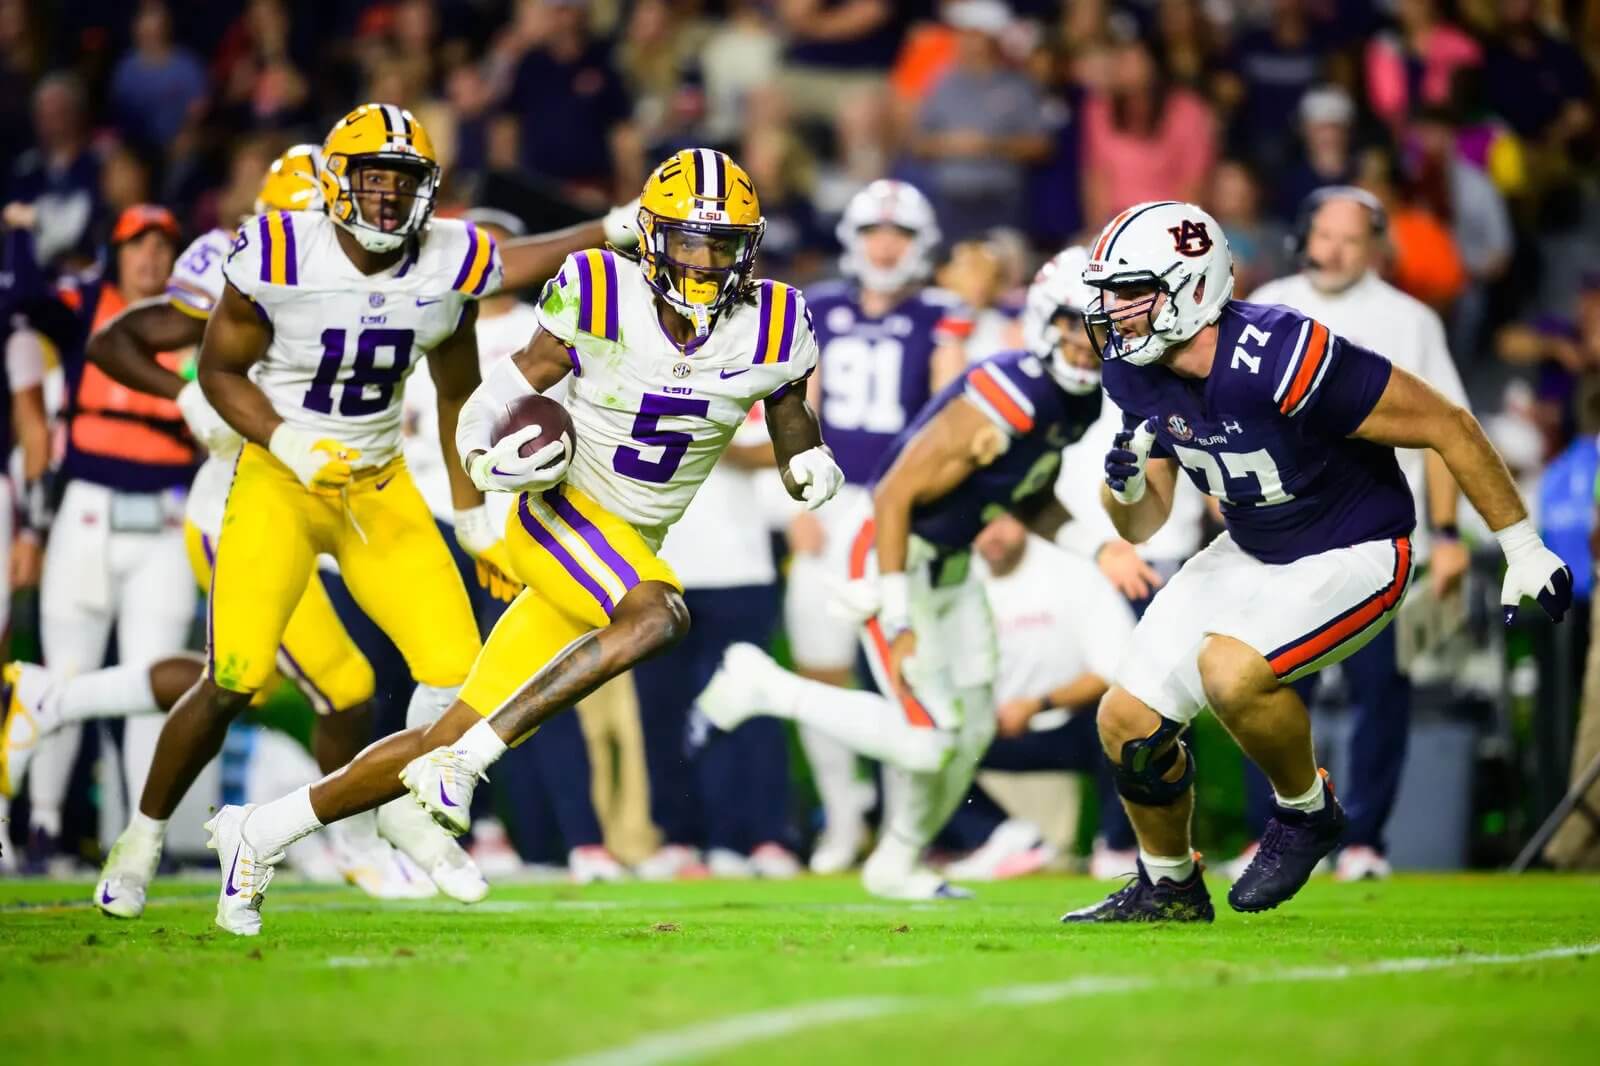 LSU Shows Fight, Running Game Comes Alive, Defense Plays Best When It Matters Most, and More Takeaways From Win Against Auburn Heading Into Tennessee